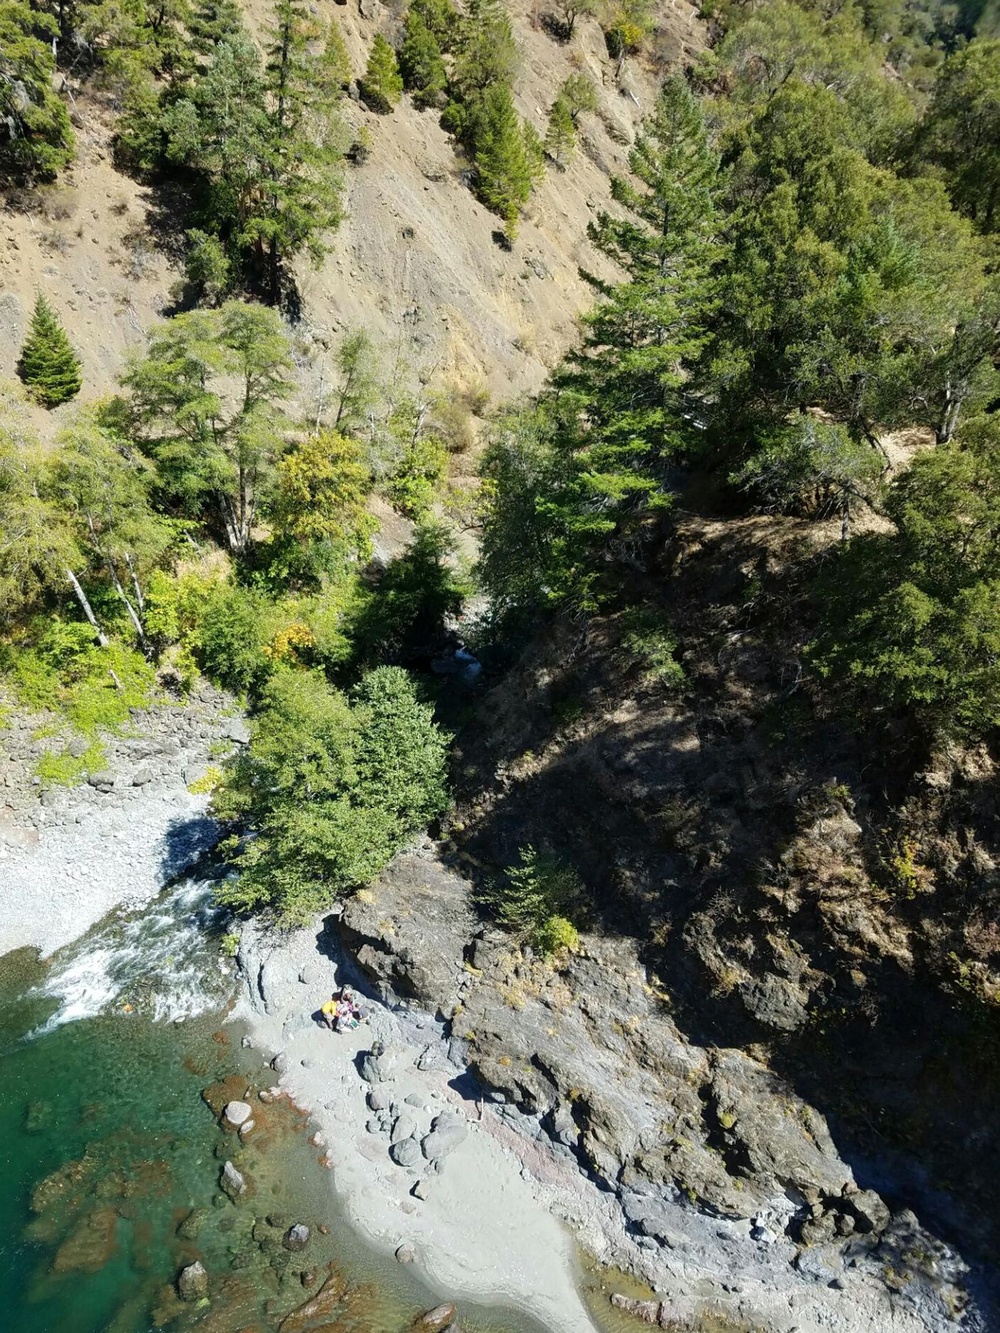 Coast Guard assist locals in rescue of injured hiker near Agness, Ore.